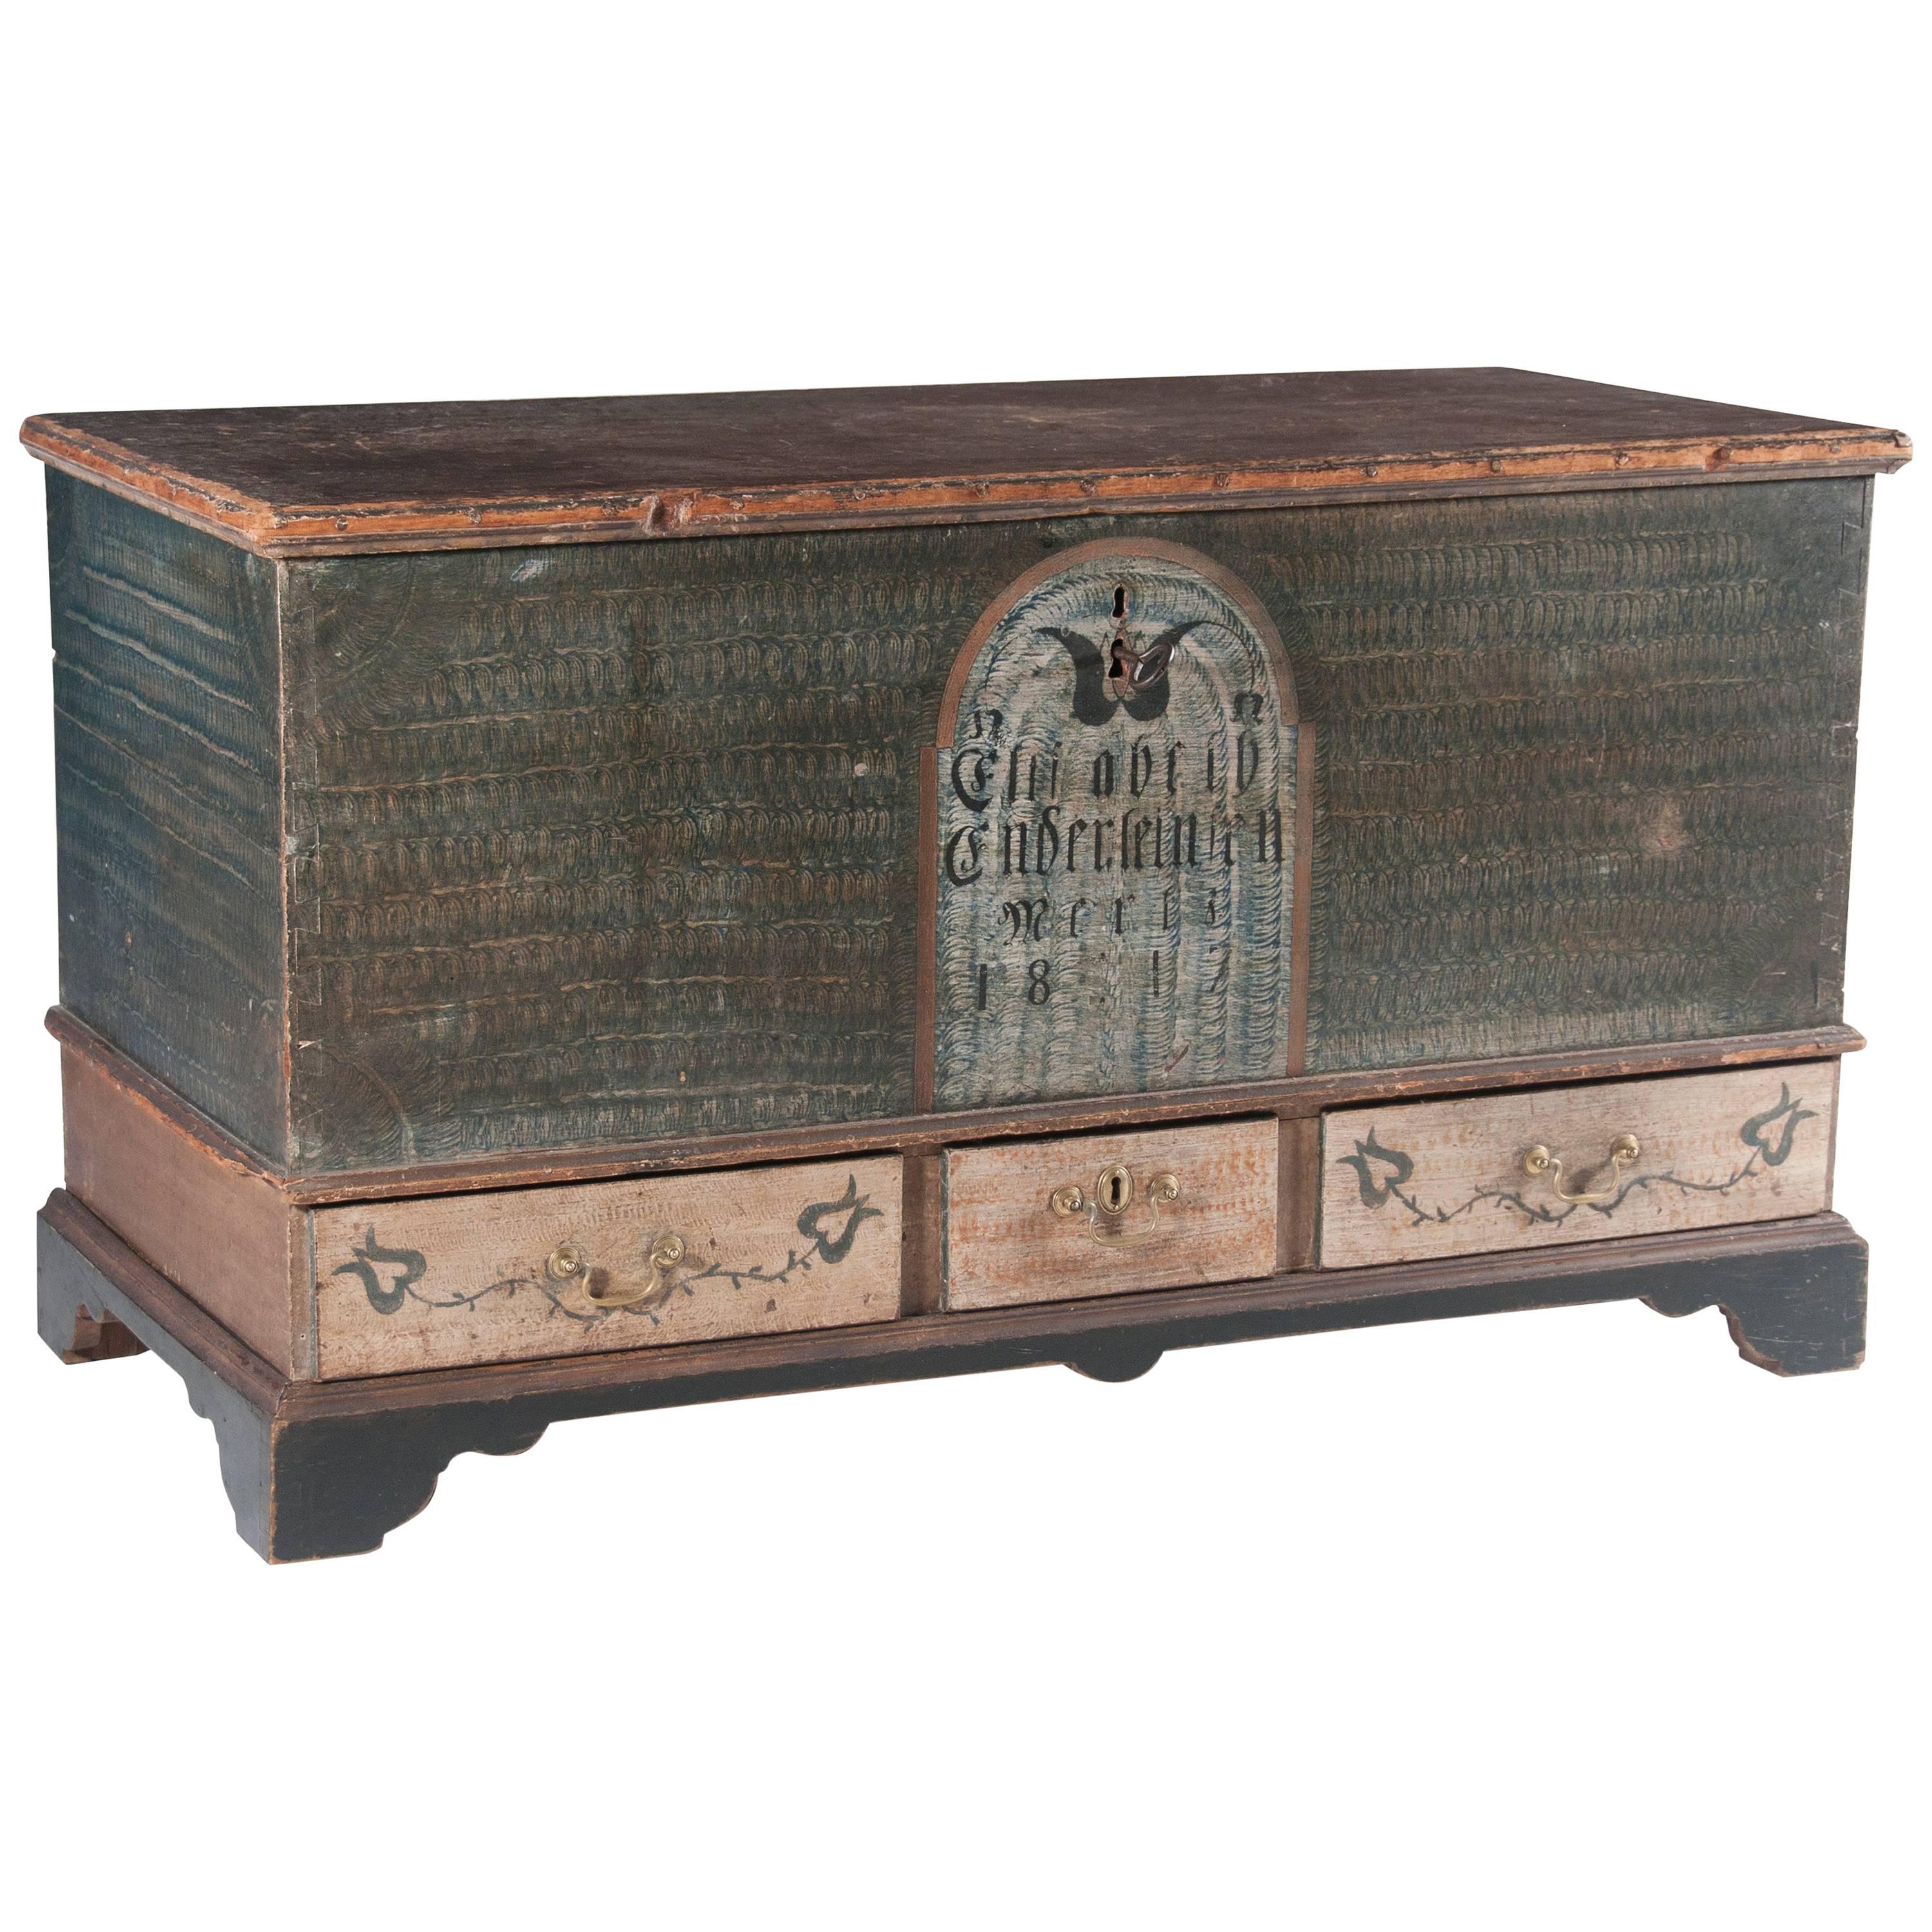 Poplar Green Paint Decorated Blanket Chest